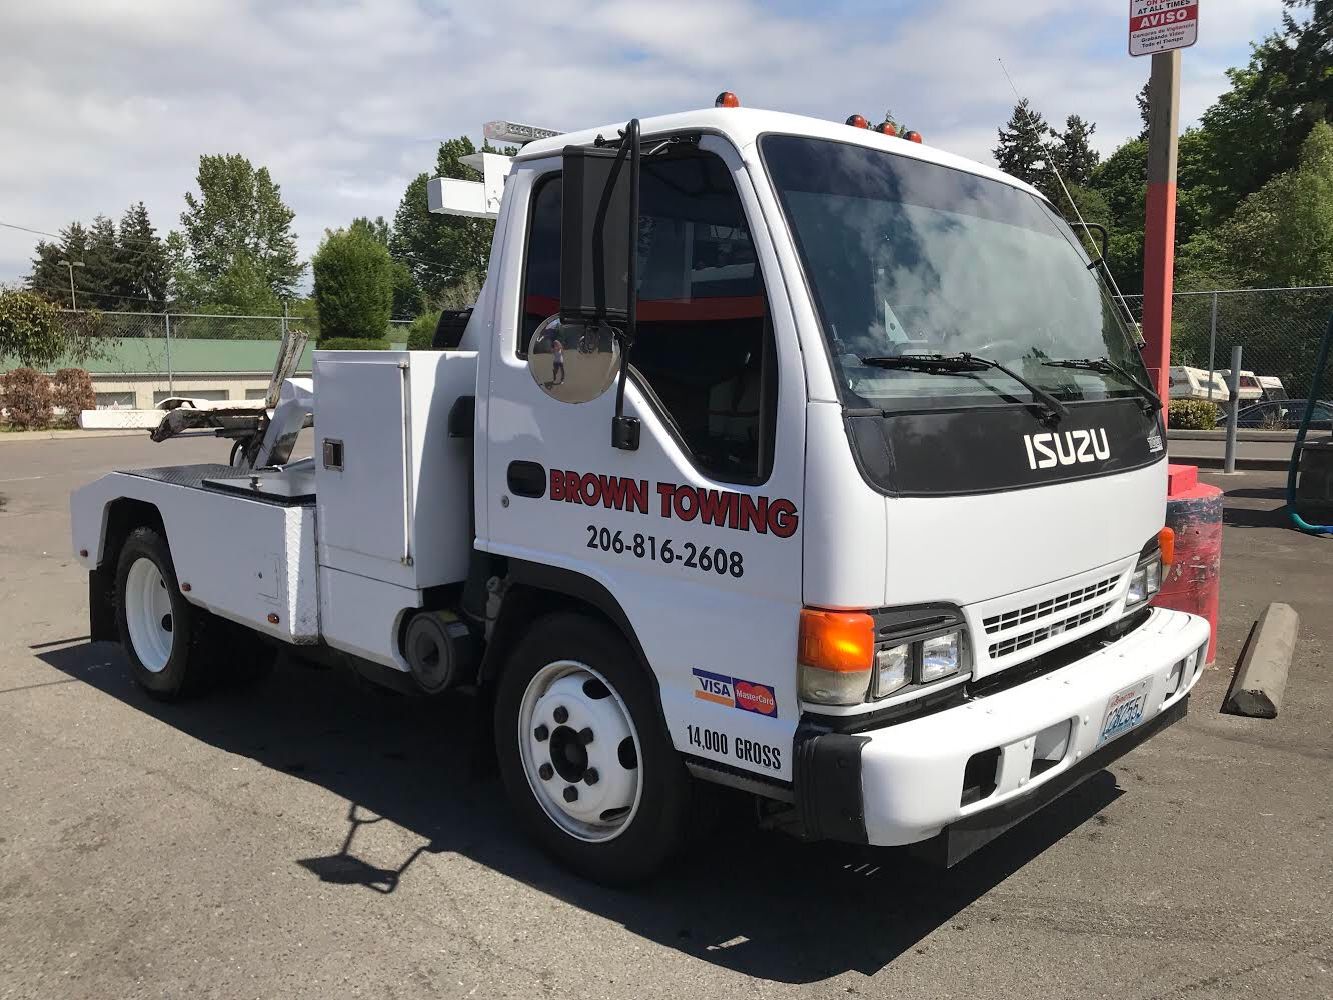 Tow Truck Repo Recovery Self Loader Brown Towing